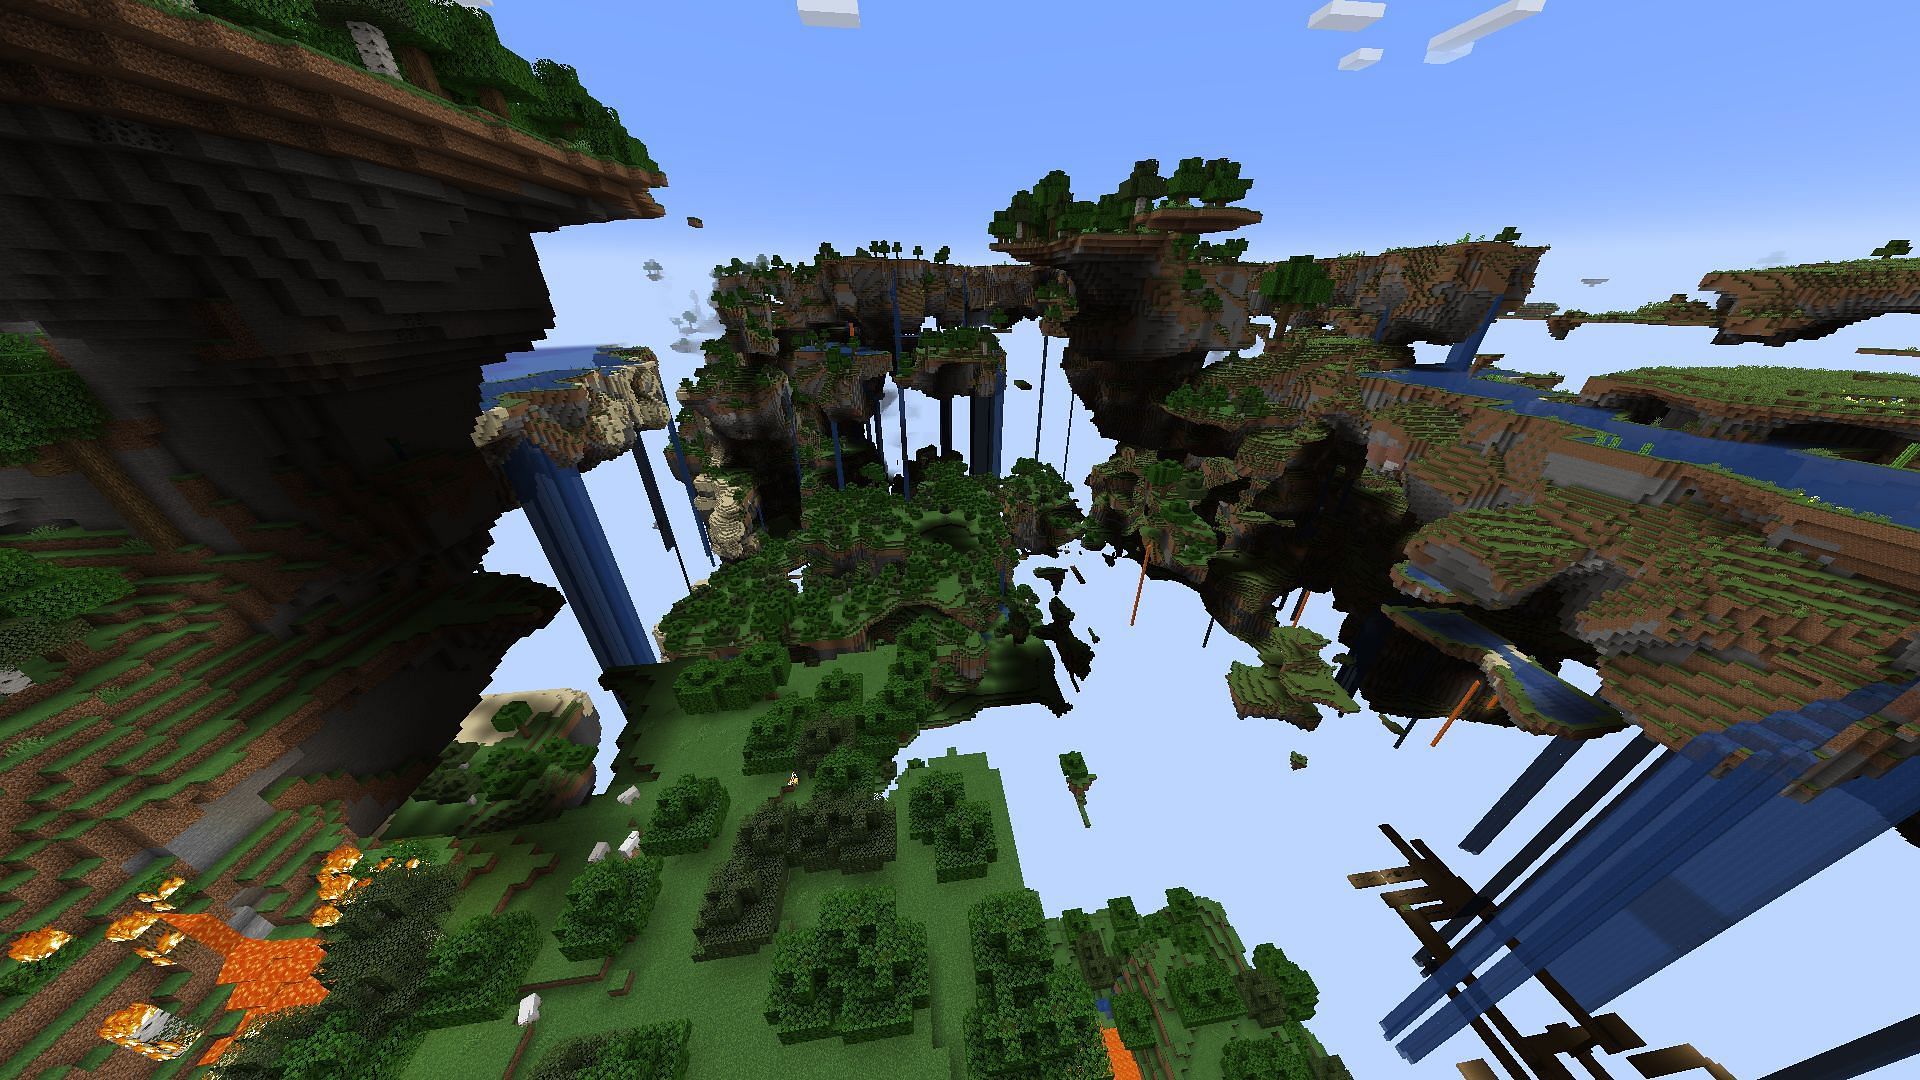 A floating island world in Minecraft using the Revamped Floating Islands data pack (Image via Mojang Studios)